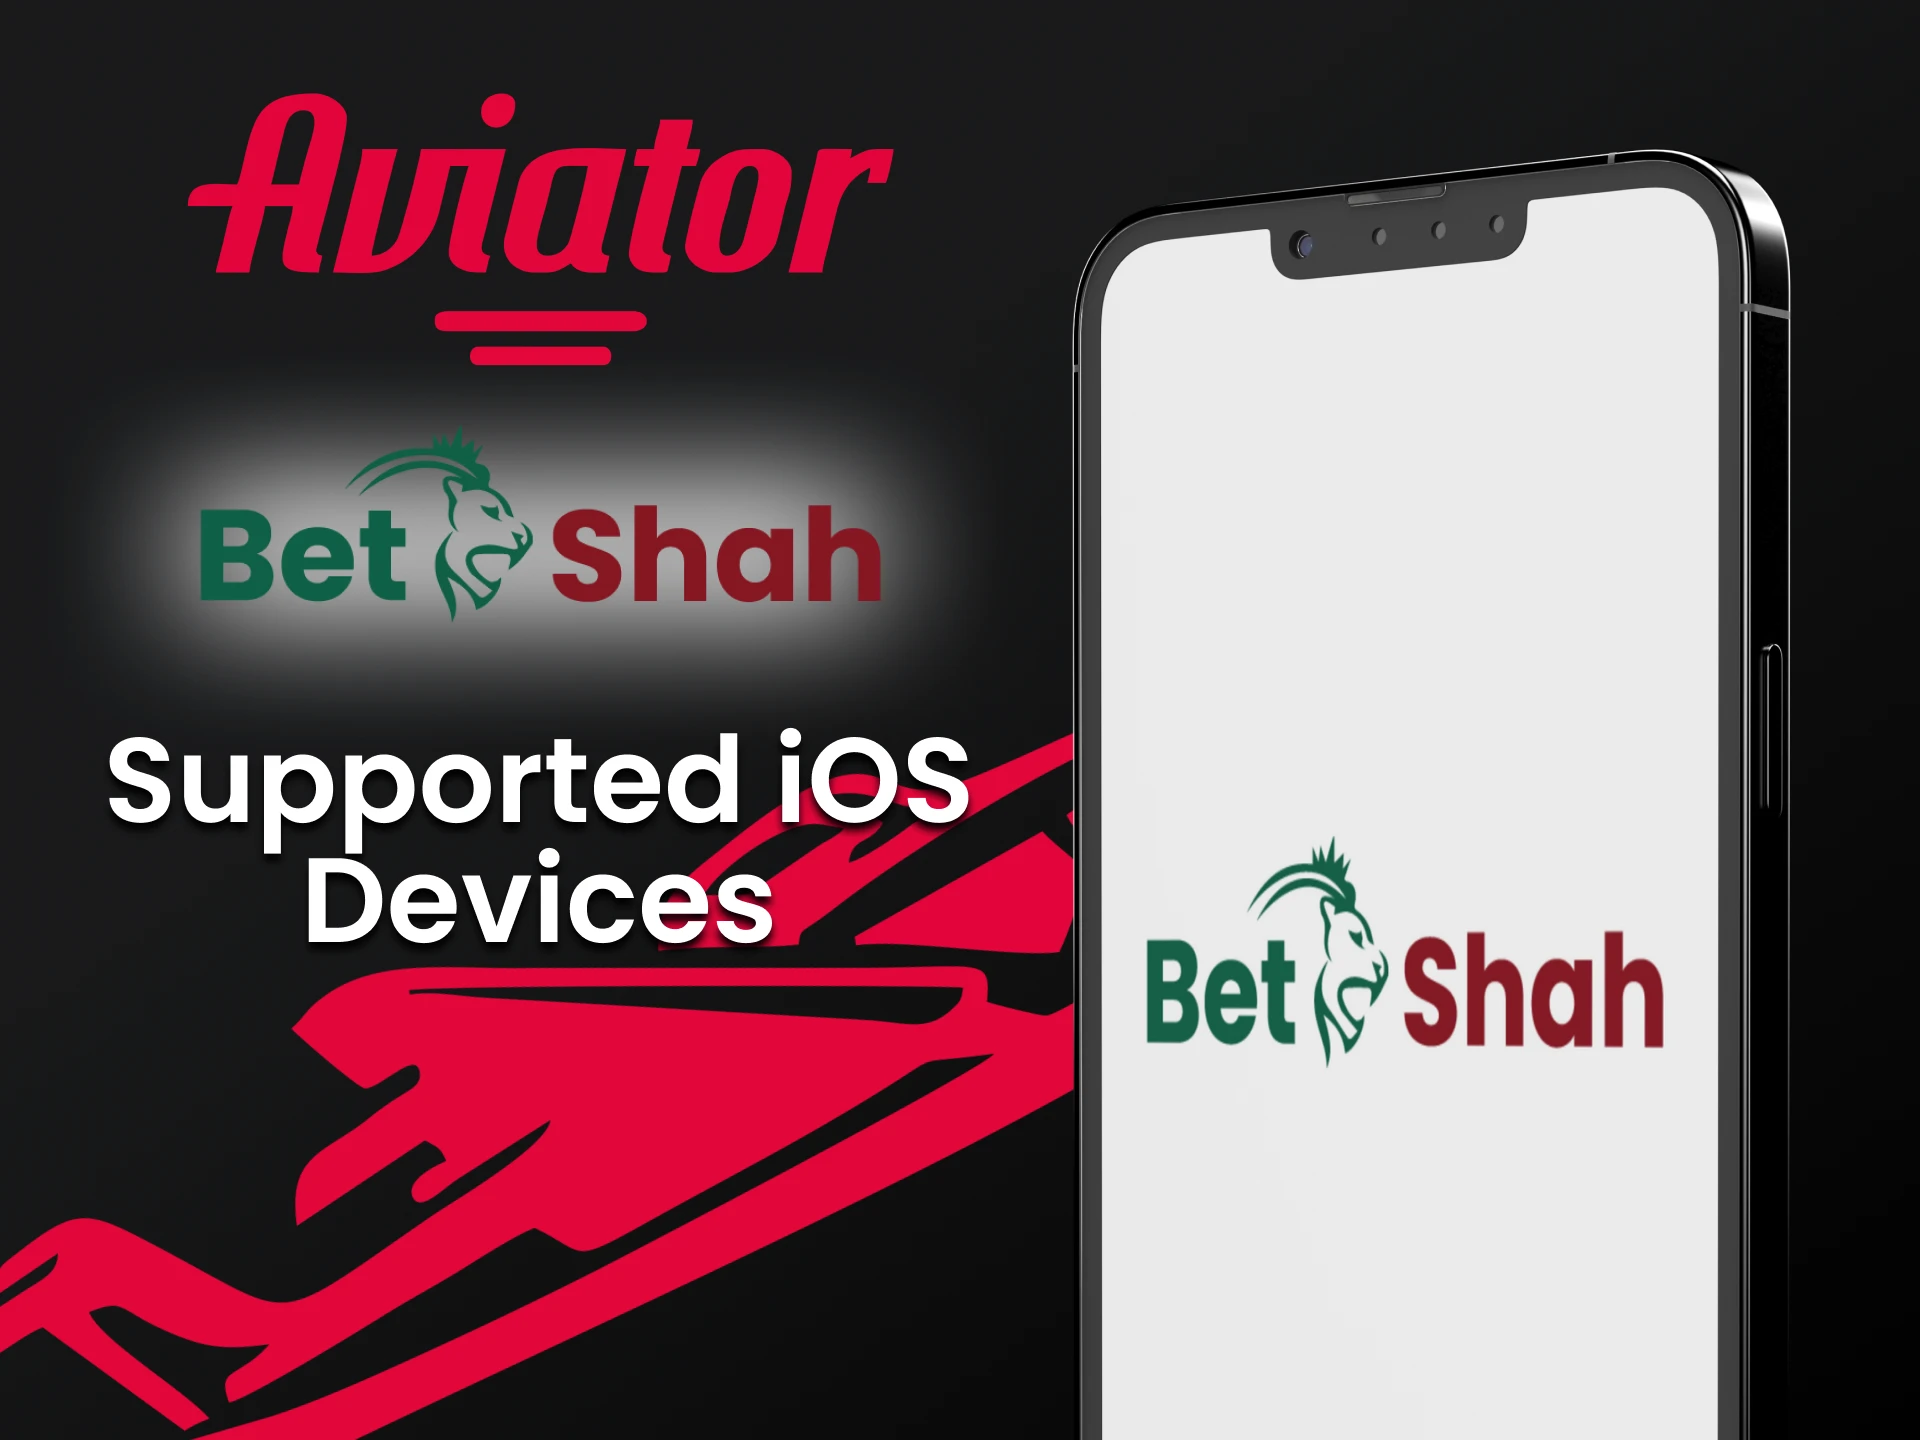 Use the BetShah app on iOS devices to play Aviator.